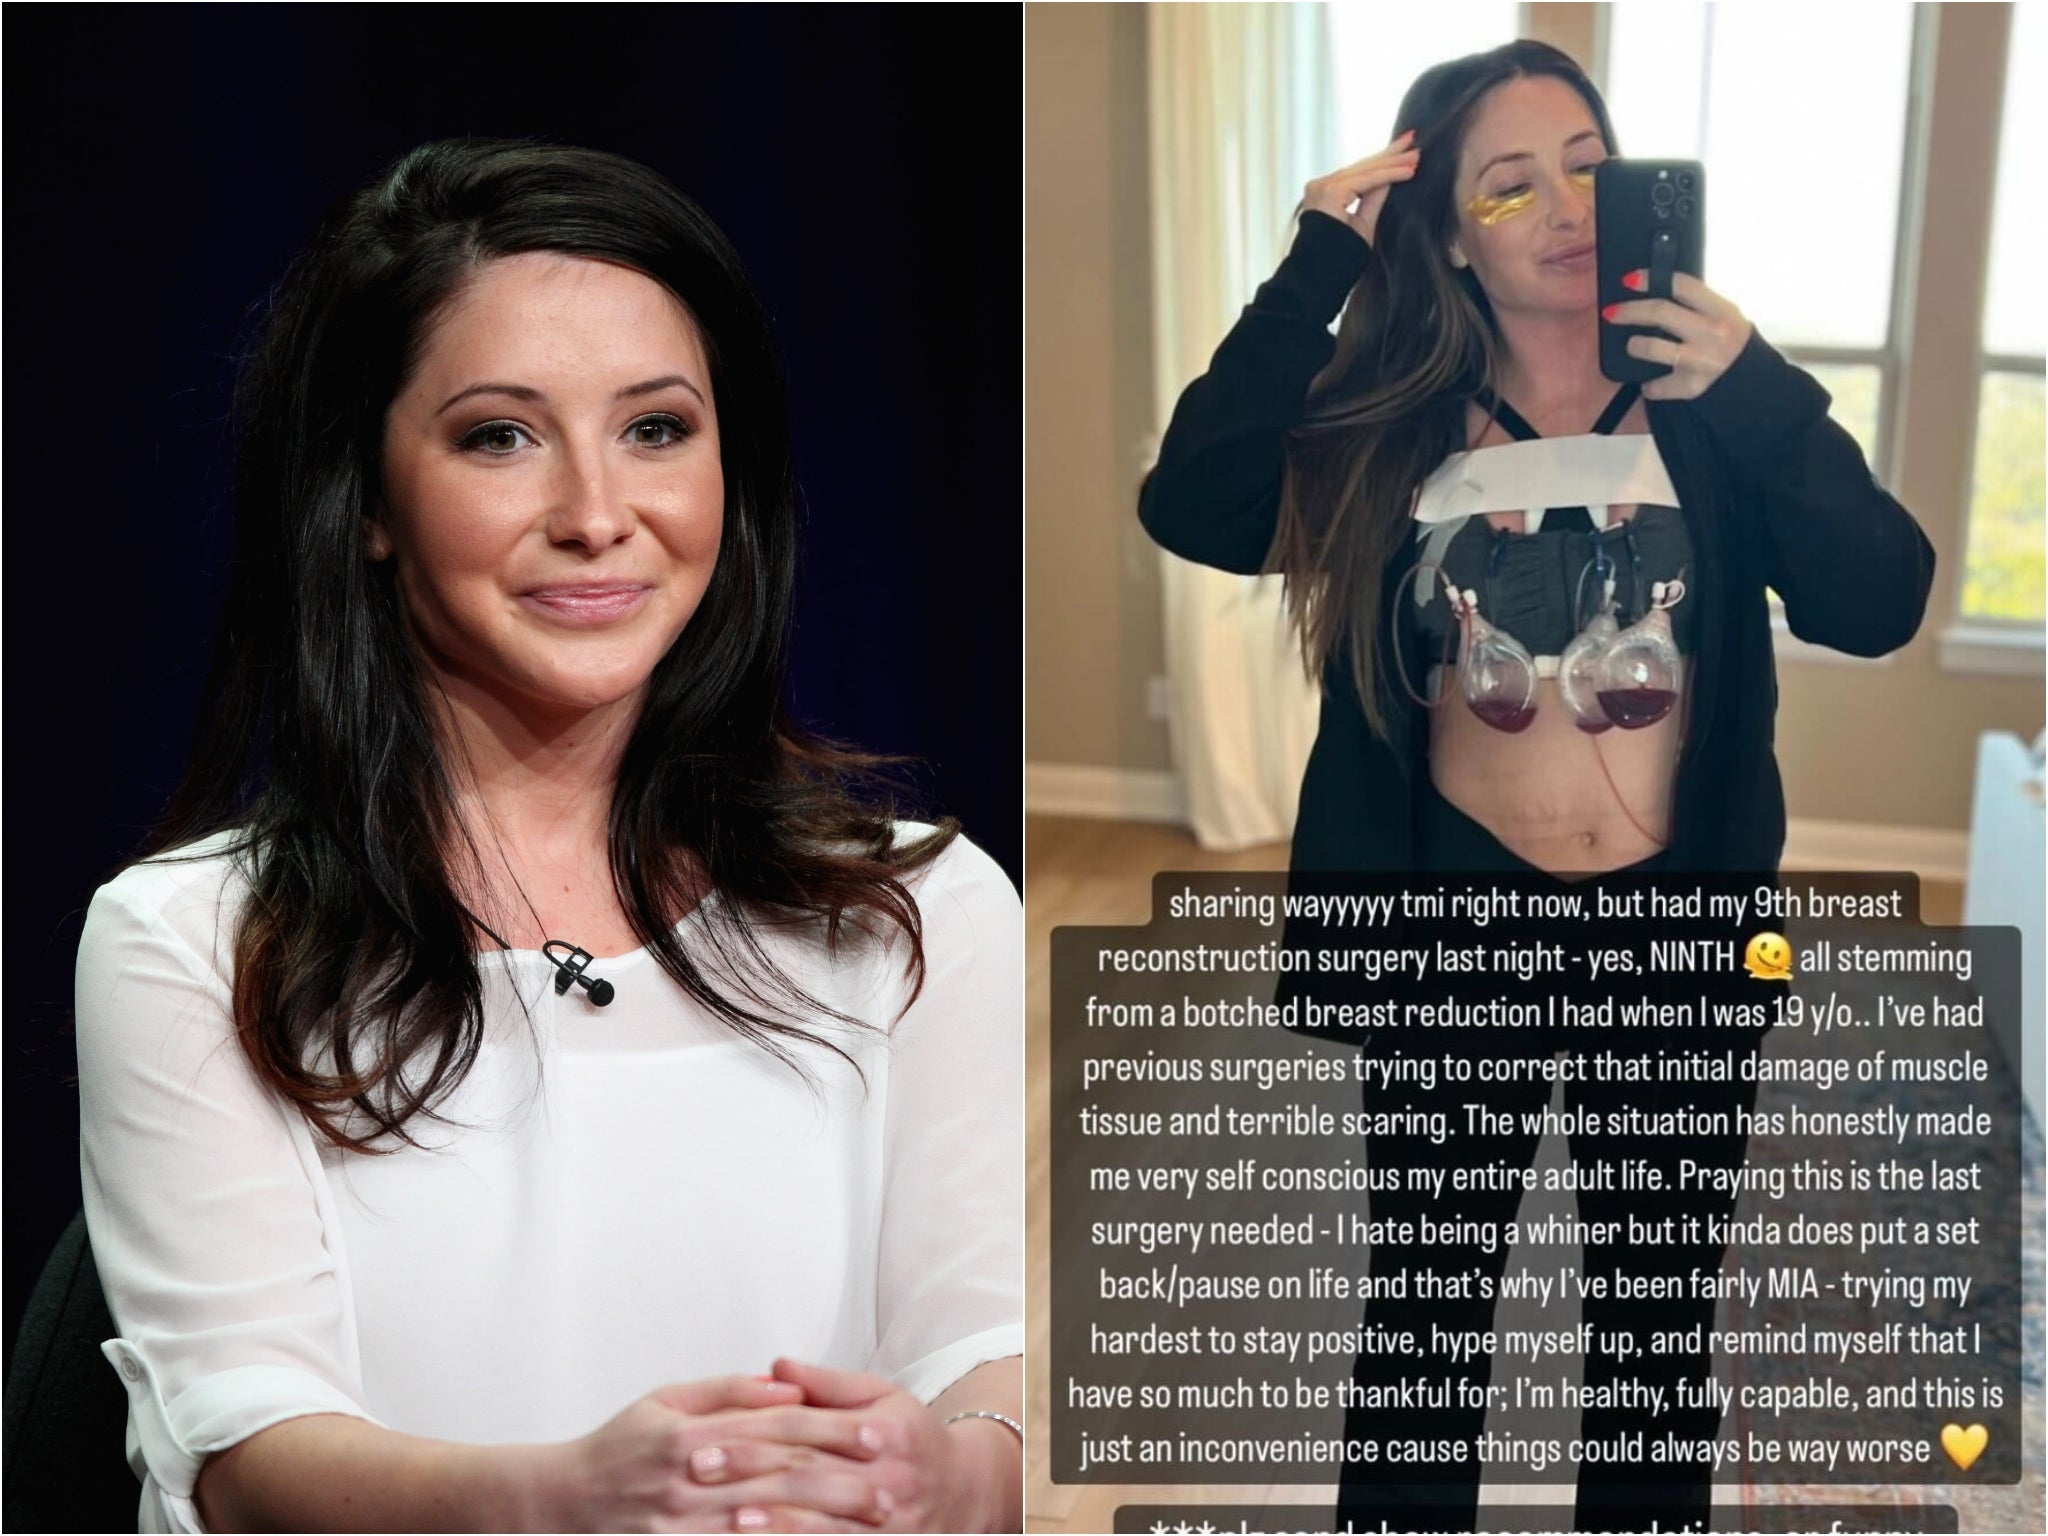 Bristol Palin reveals she has had nine breast reconstruction surgeries Praying this is the last The Independent